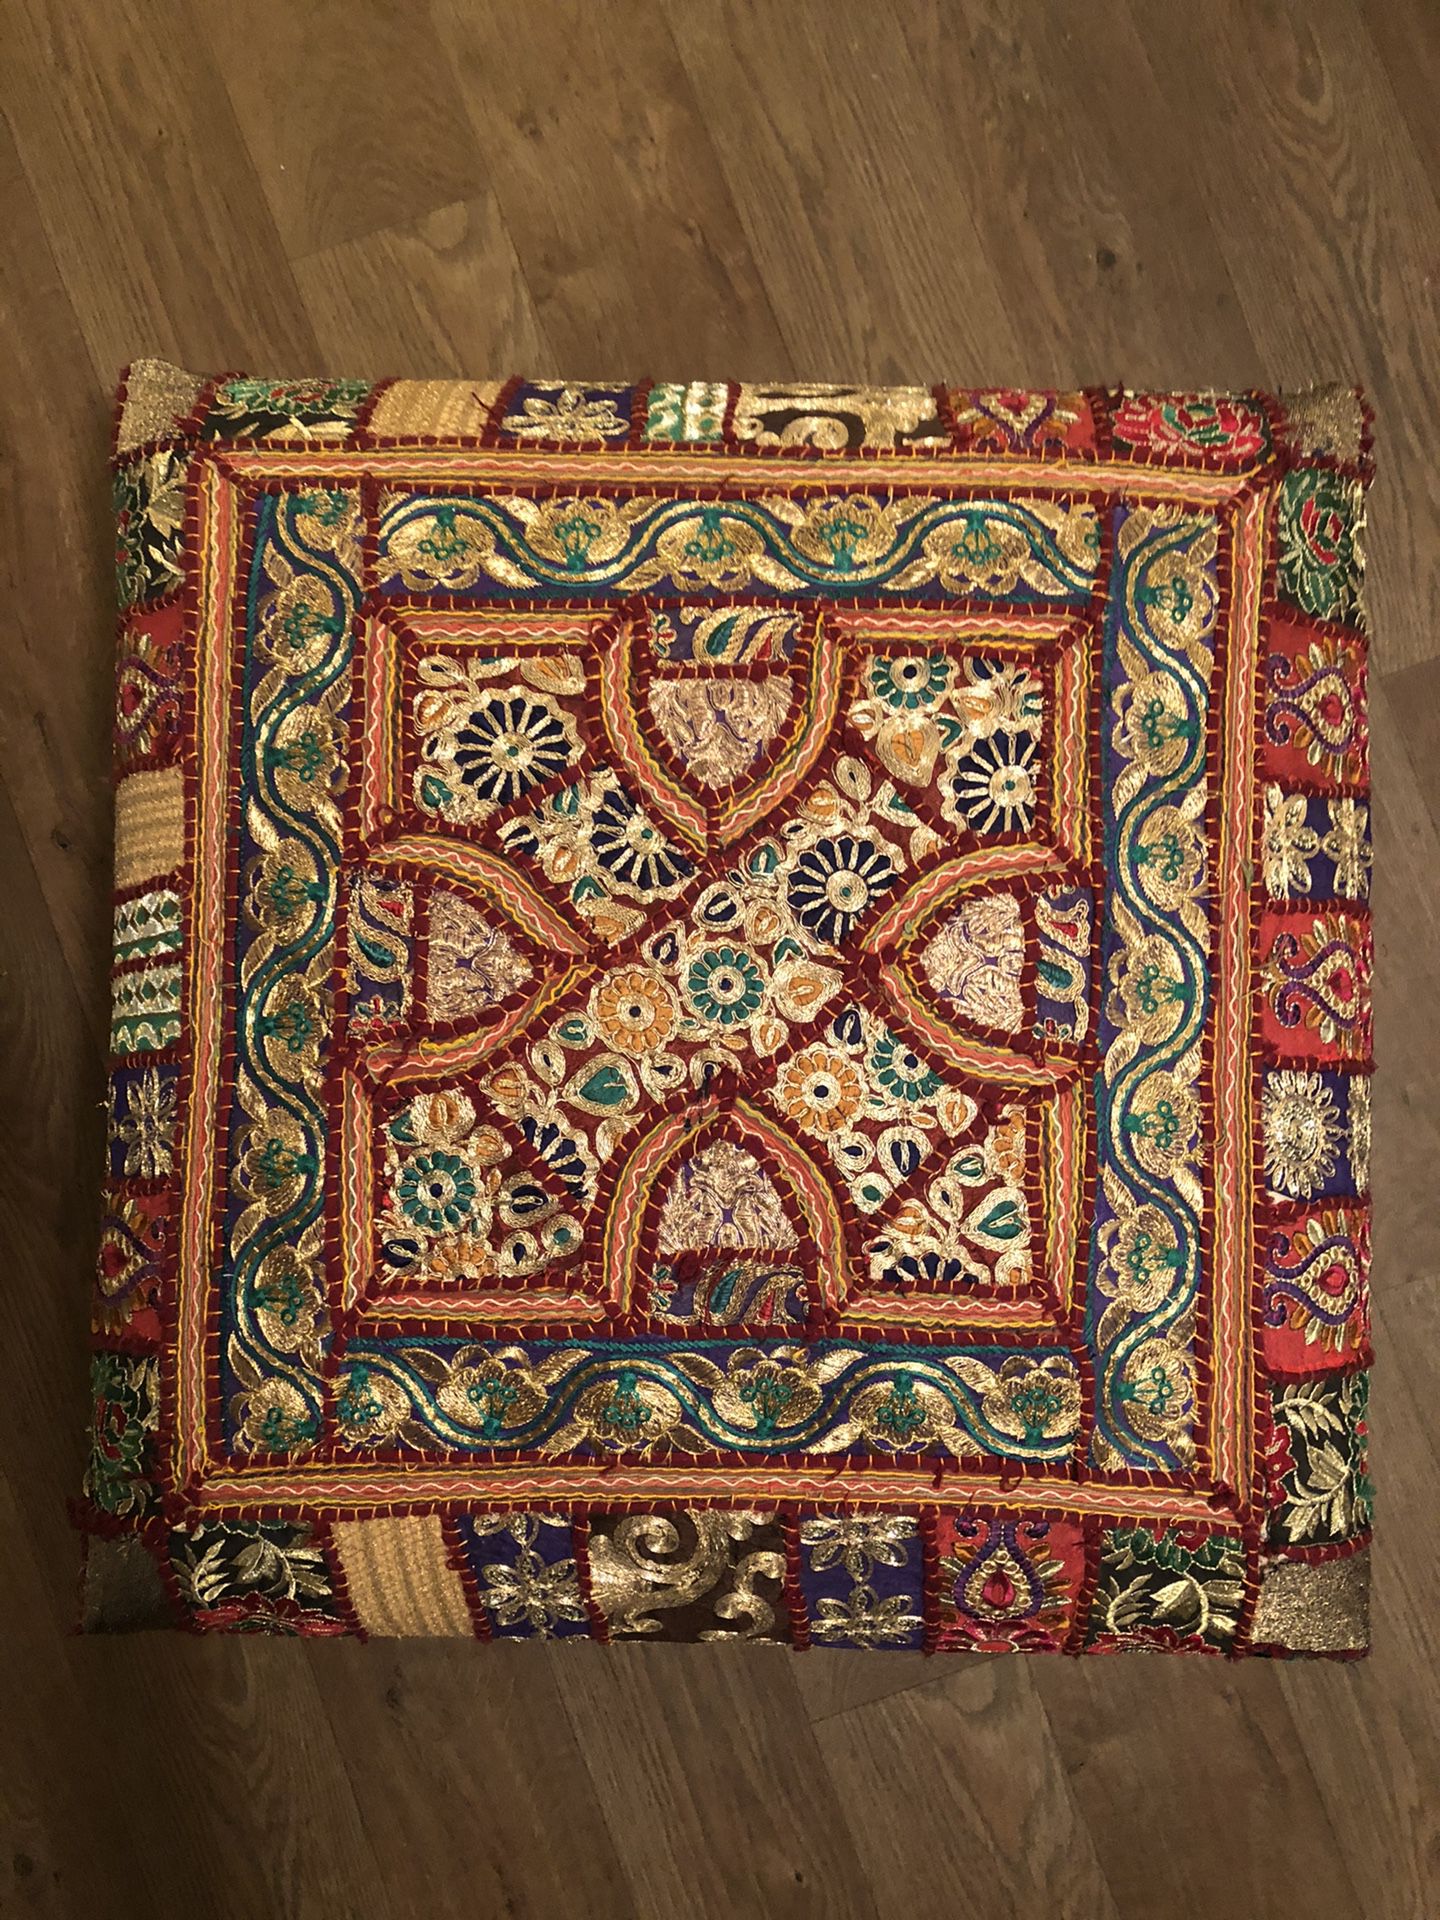 Embroidered Ottoman